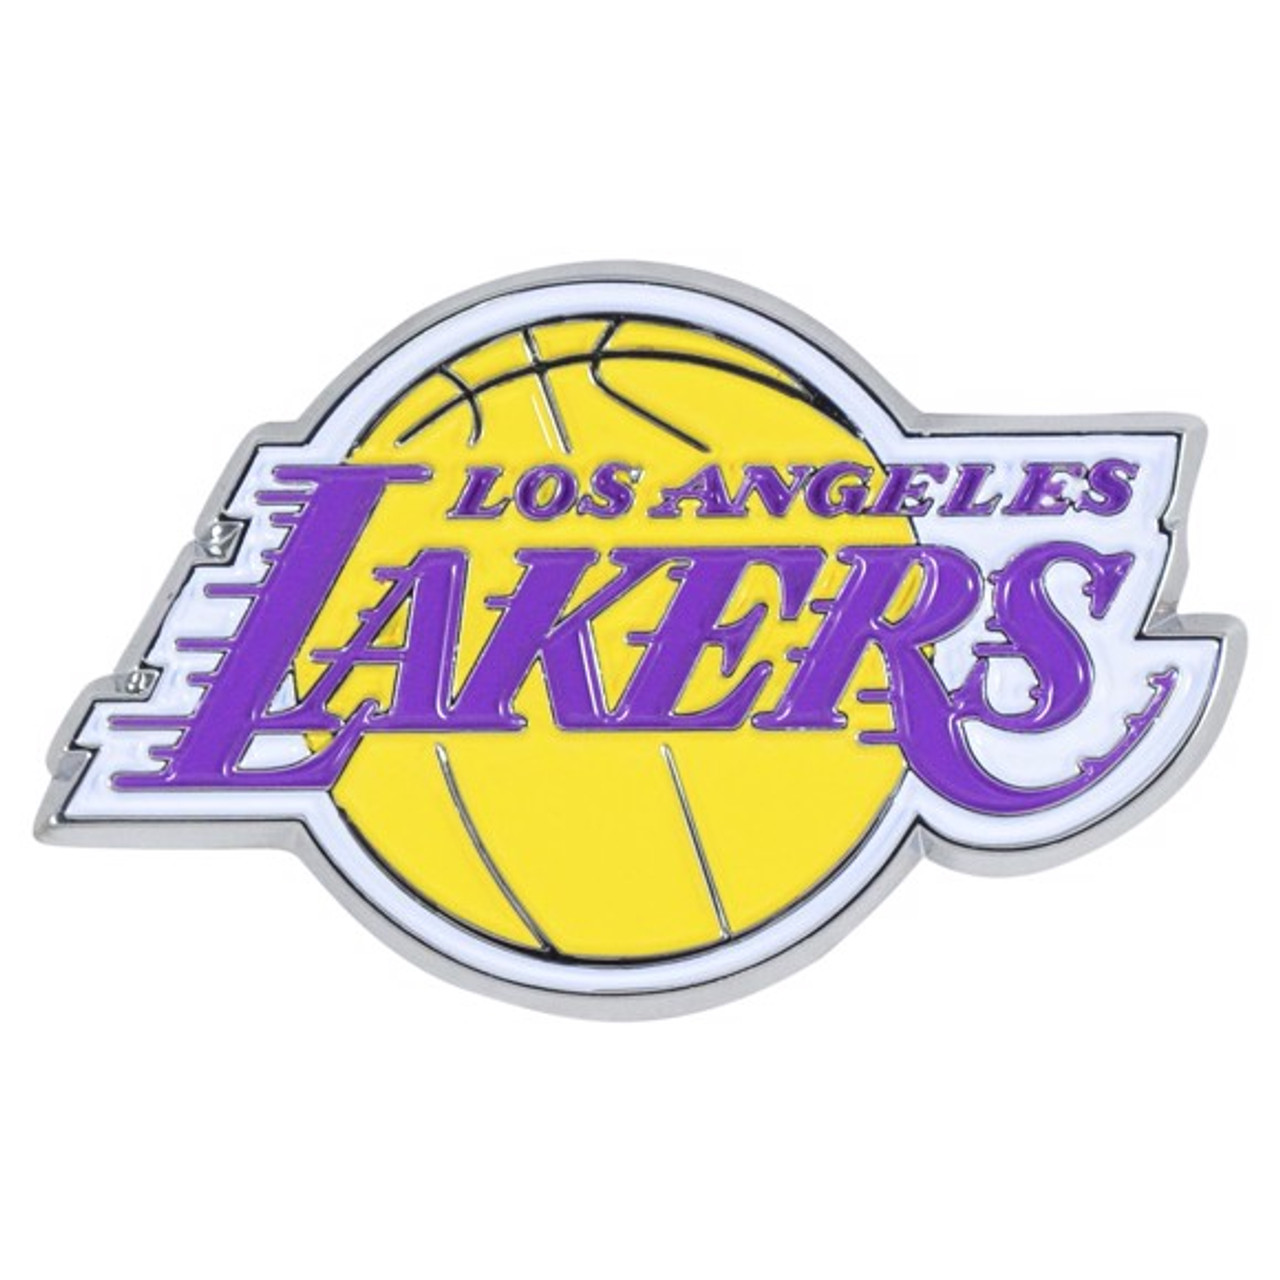 Los Angeles Lakers flag color codes